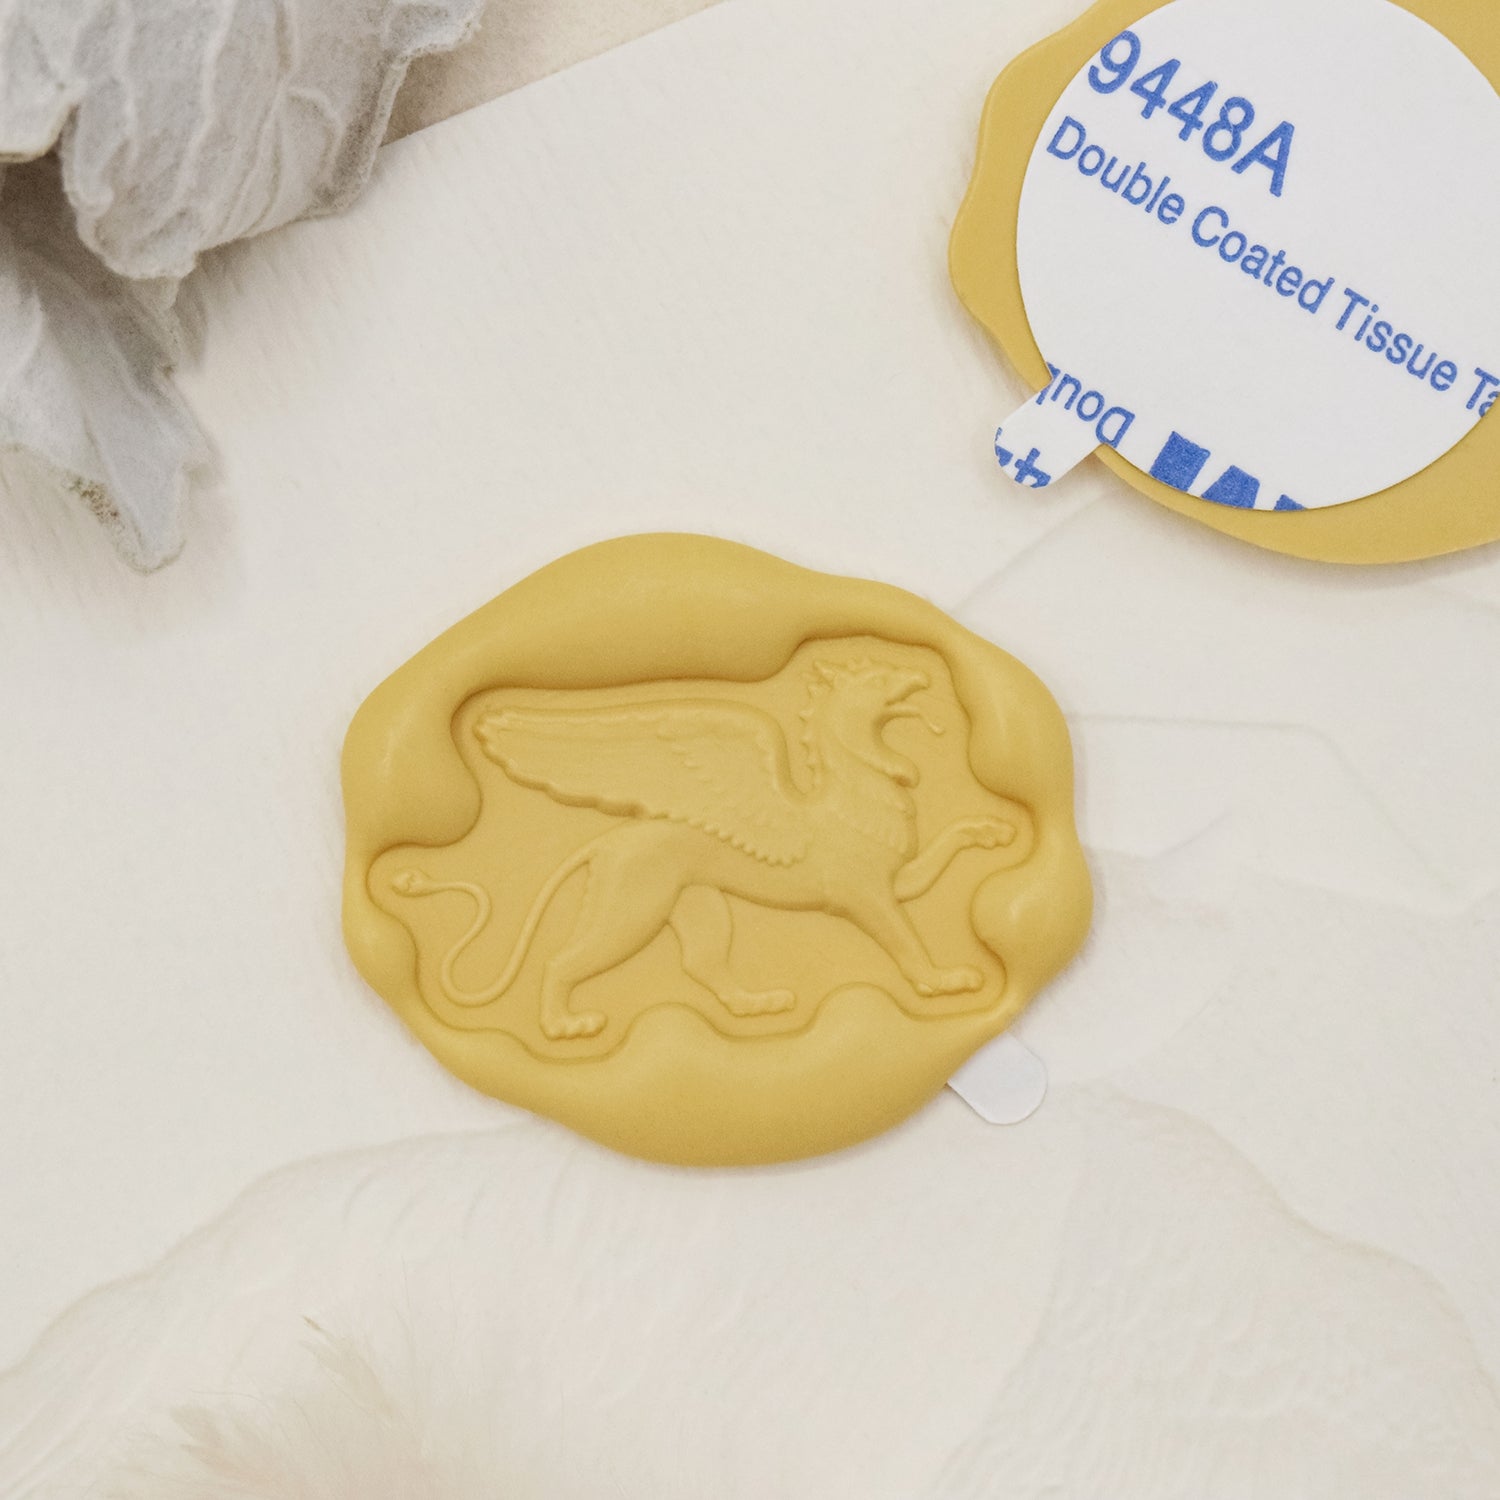 Stamprints 3D Relief Griffin Self-adhesive Wax Seal Stickers 1